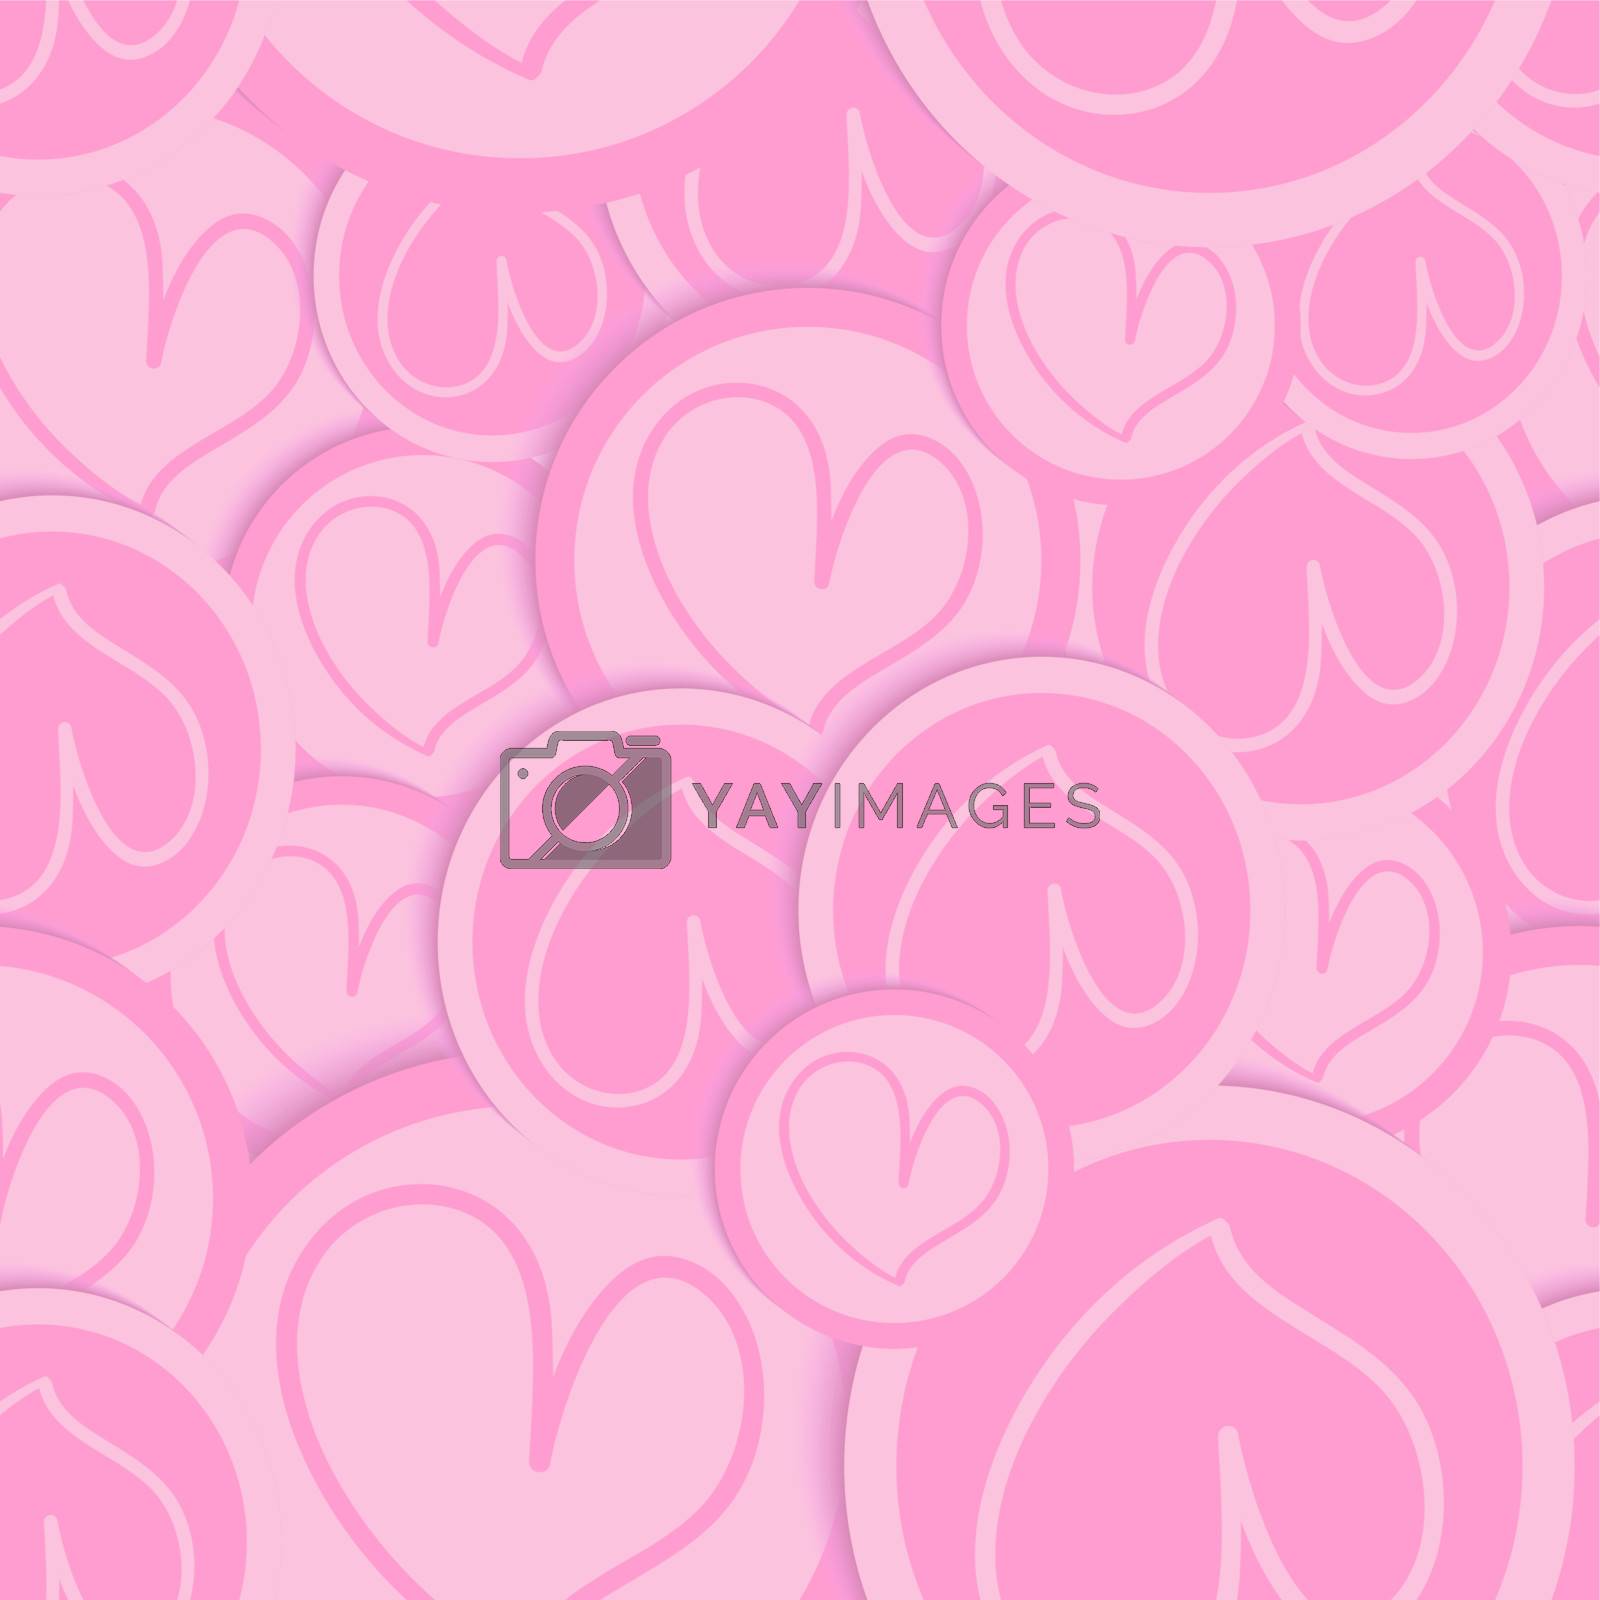 Royalty free image of Valentine love heart pattern by cienpies